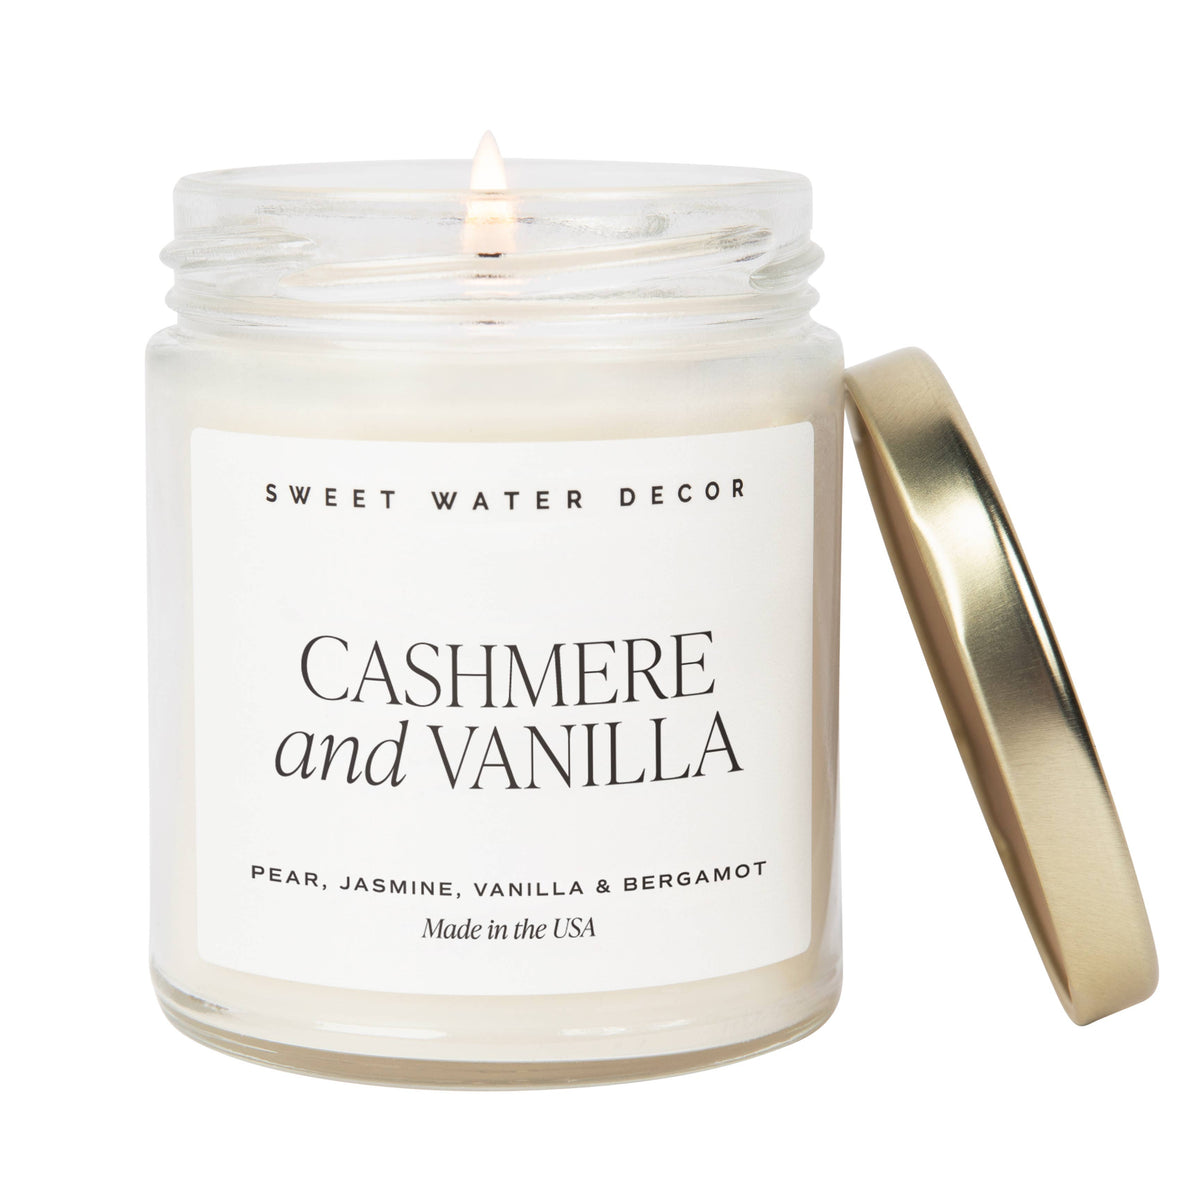 Cashmere and Vanilla 9 oz Soy Candle - The Preppy Bunny